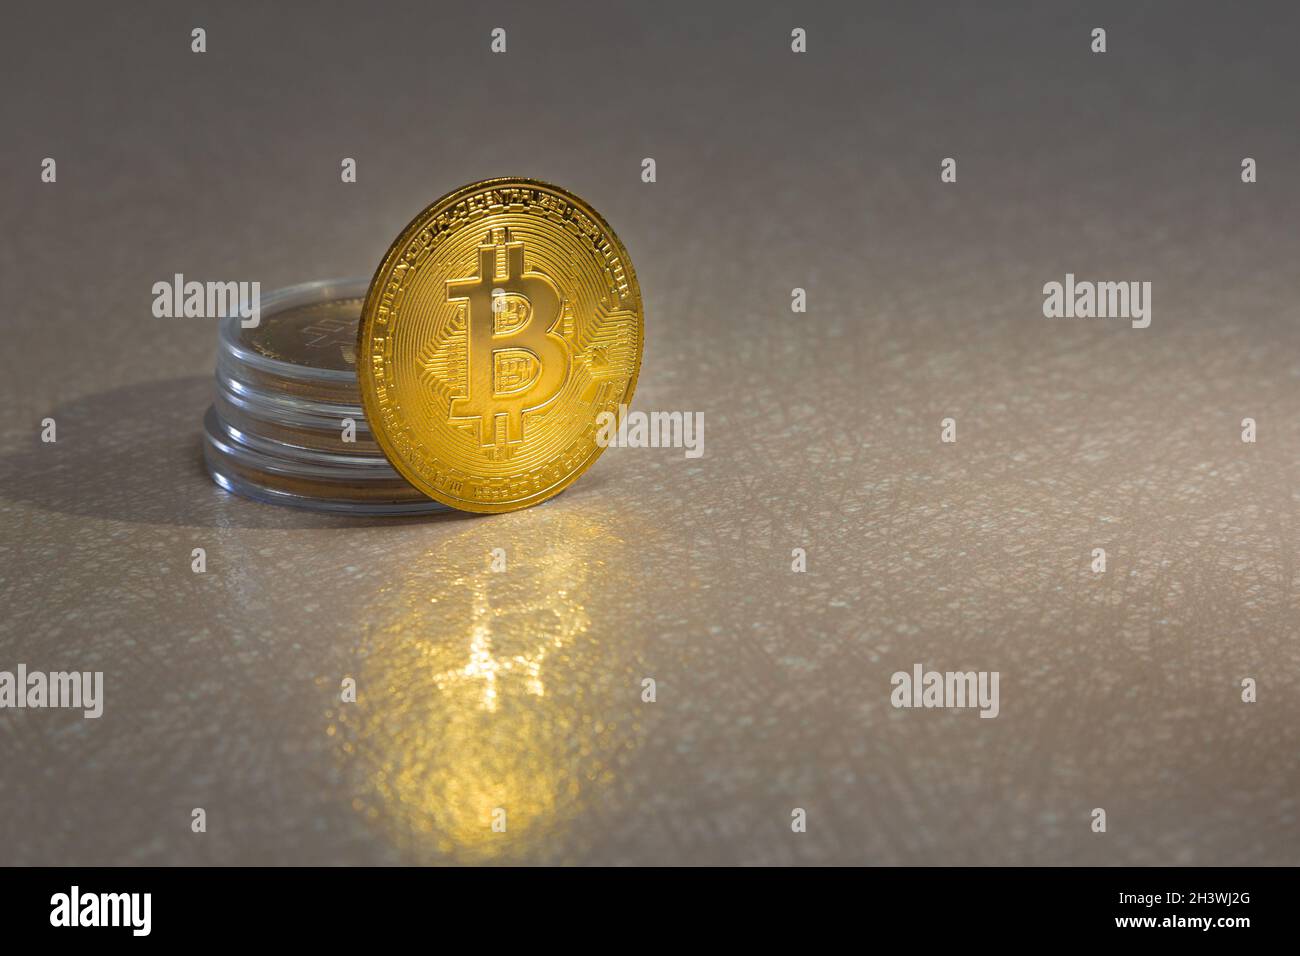 Cryptocurrency bitcoin the future coin. Bitcoin BTC Cryptocurrency Coins. Stock Market Concept. Stock Photo